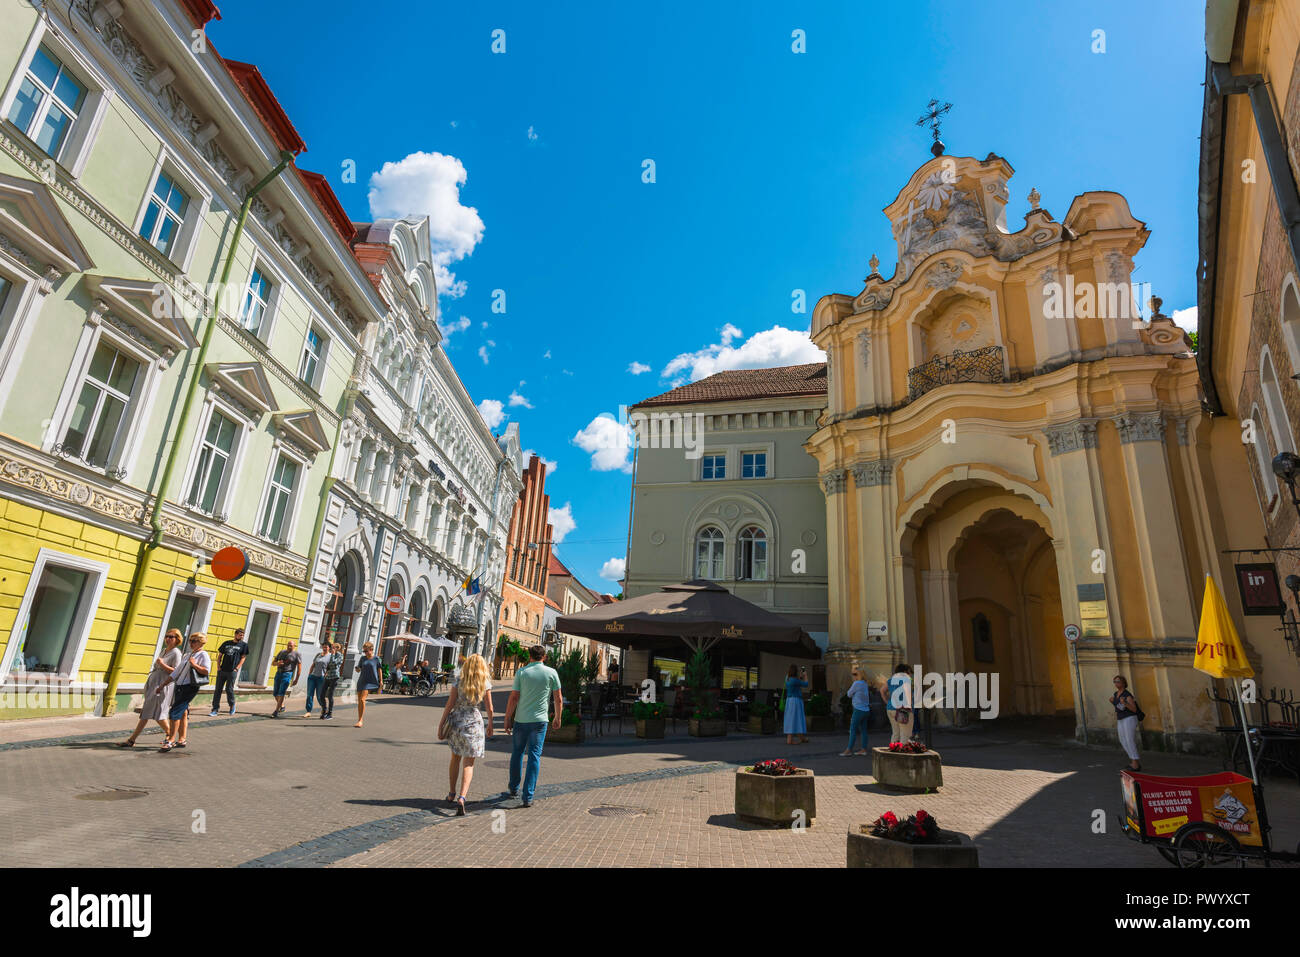 Vilnius old town, view along Didzioji Gatve, a main thoroughfare in the center of Vilnius Old Town, showing the Baroque porch of Holy Trinity Church. Stock Photo